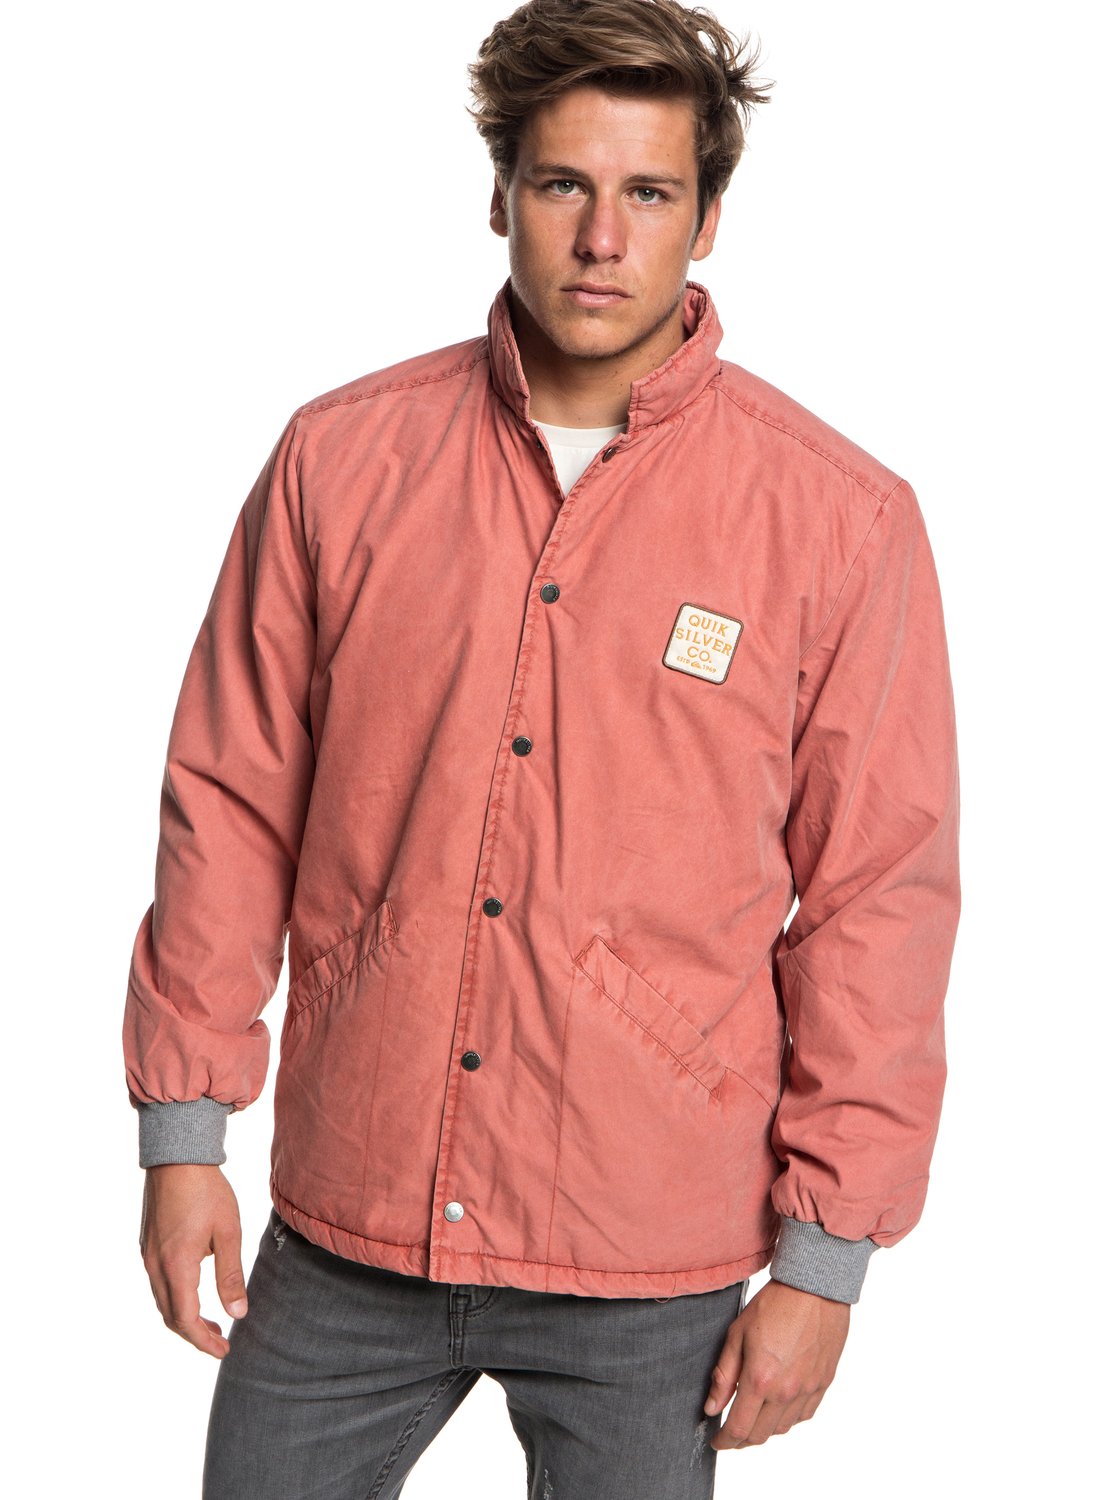 men's sherpa lined coaches jacket